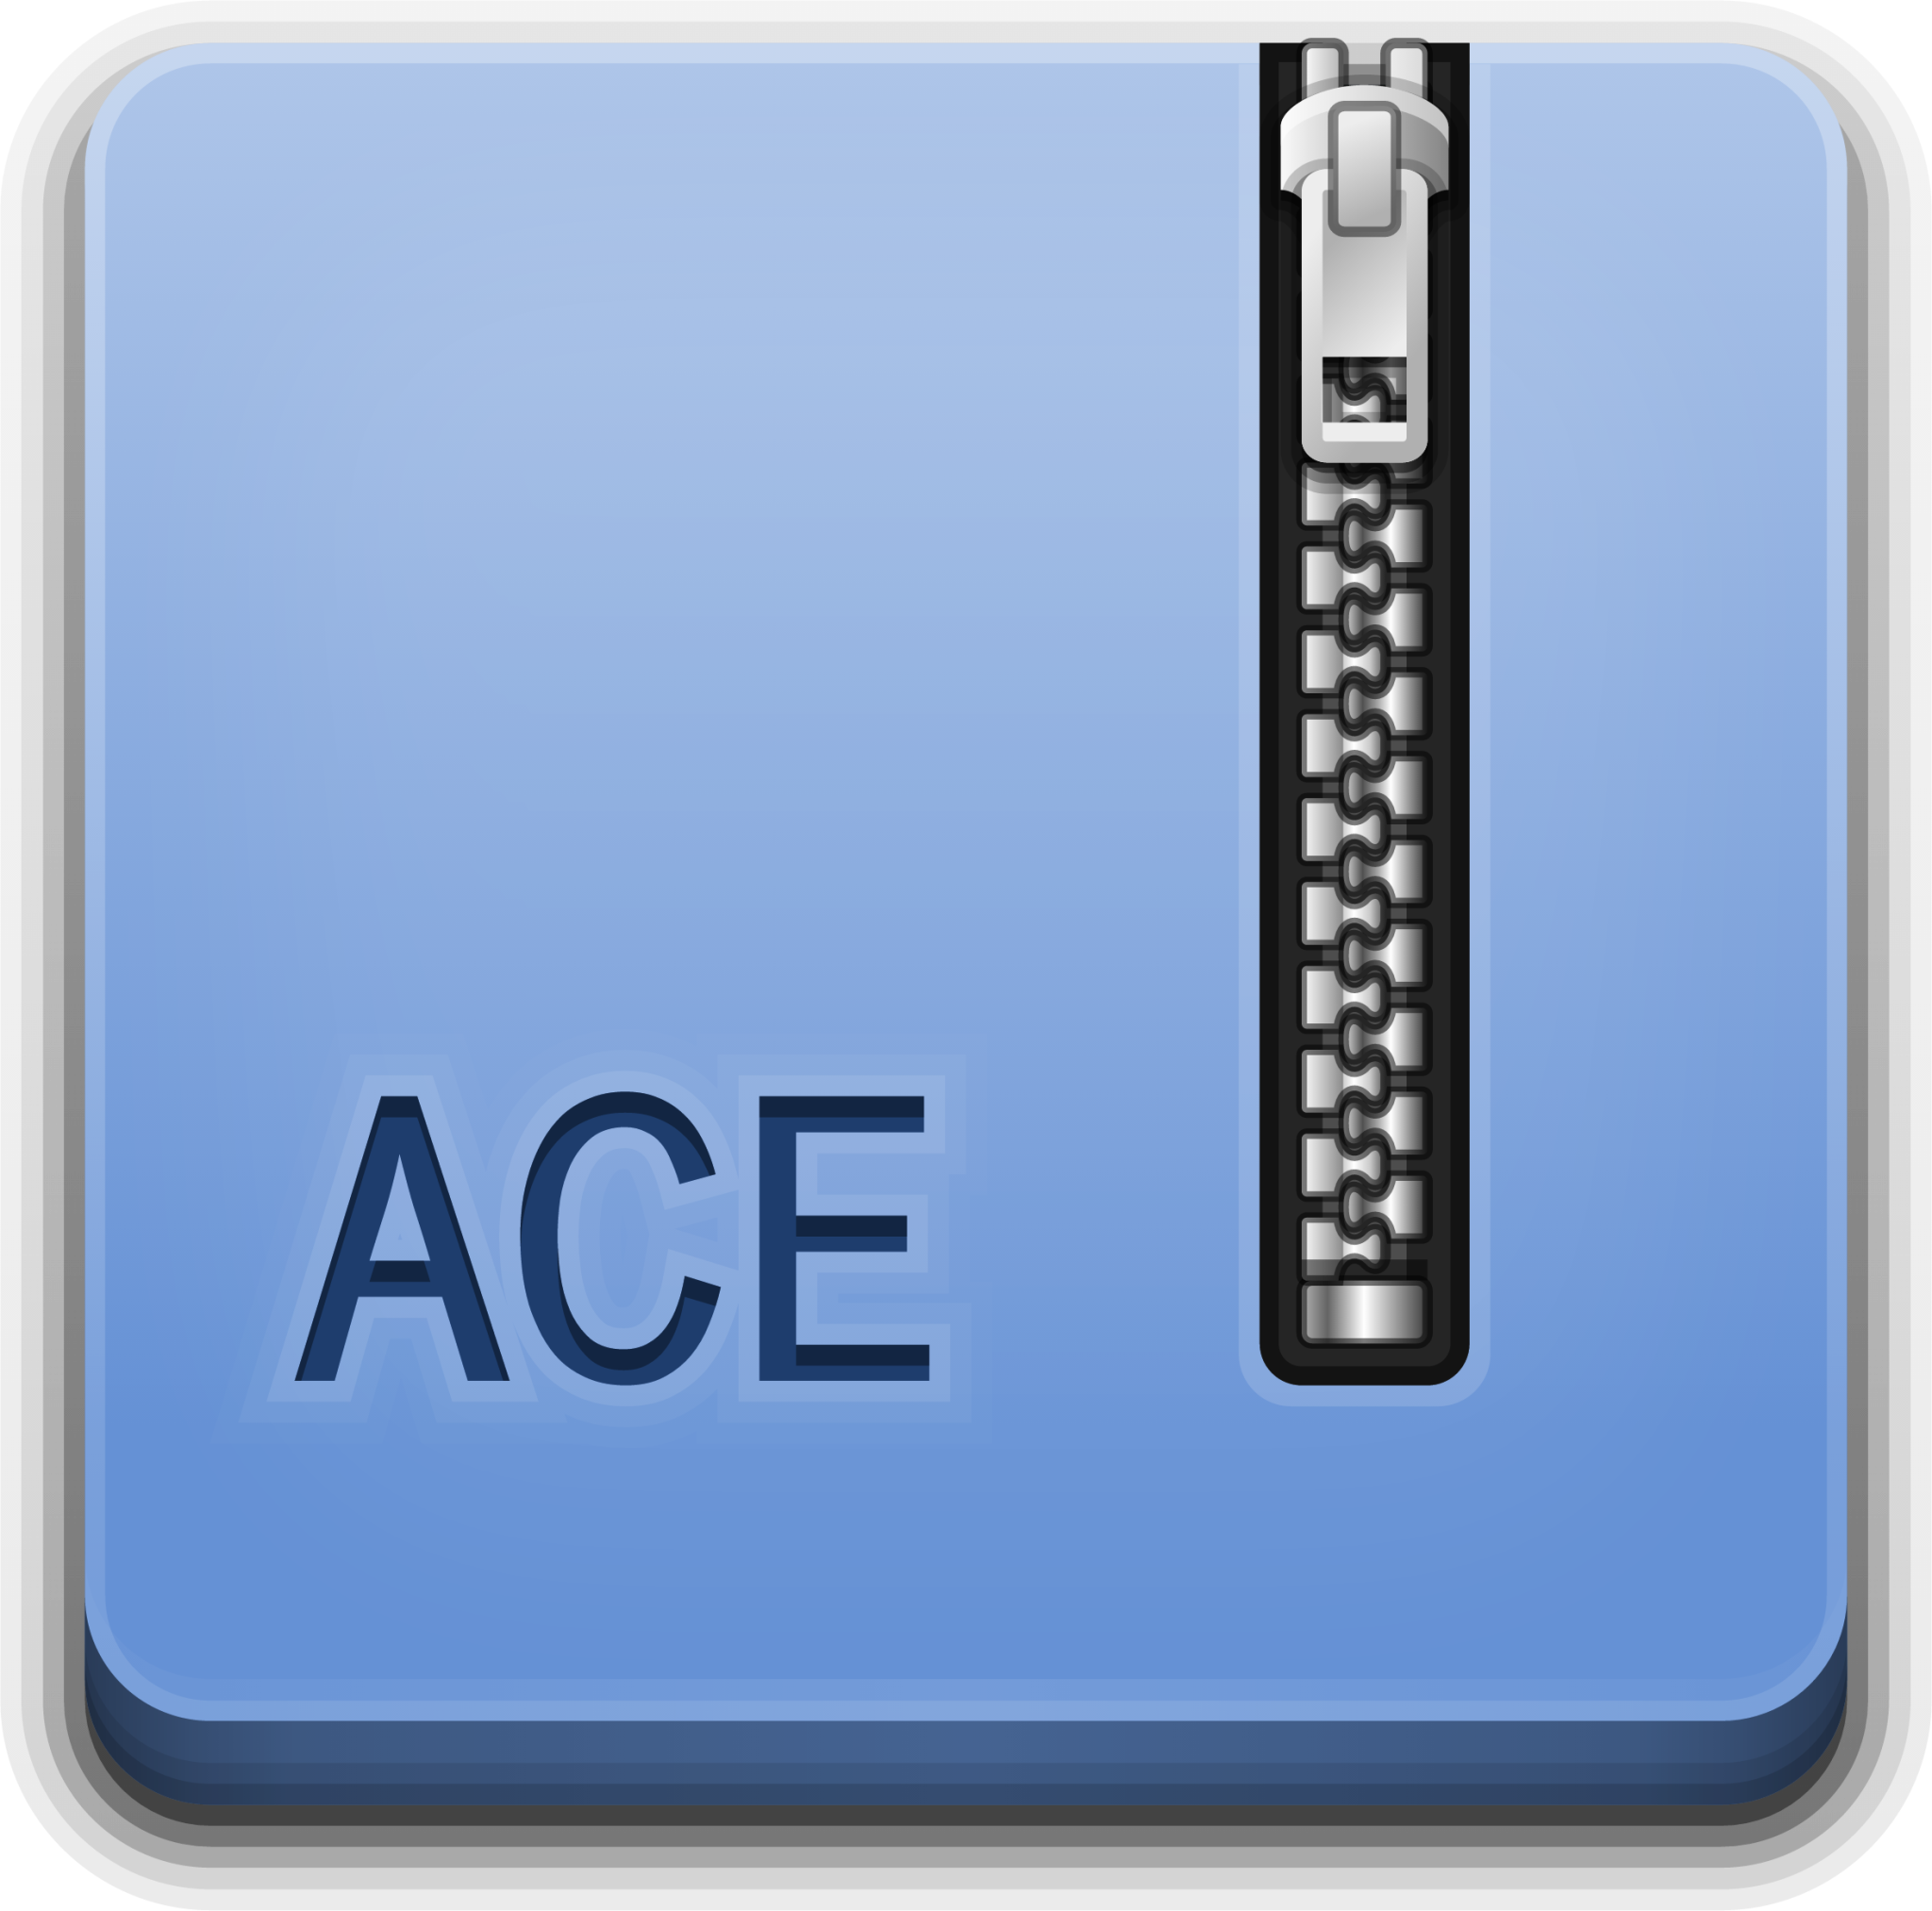 application x ace icon